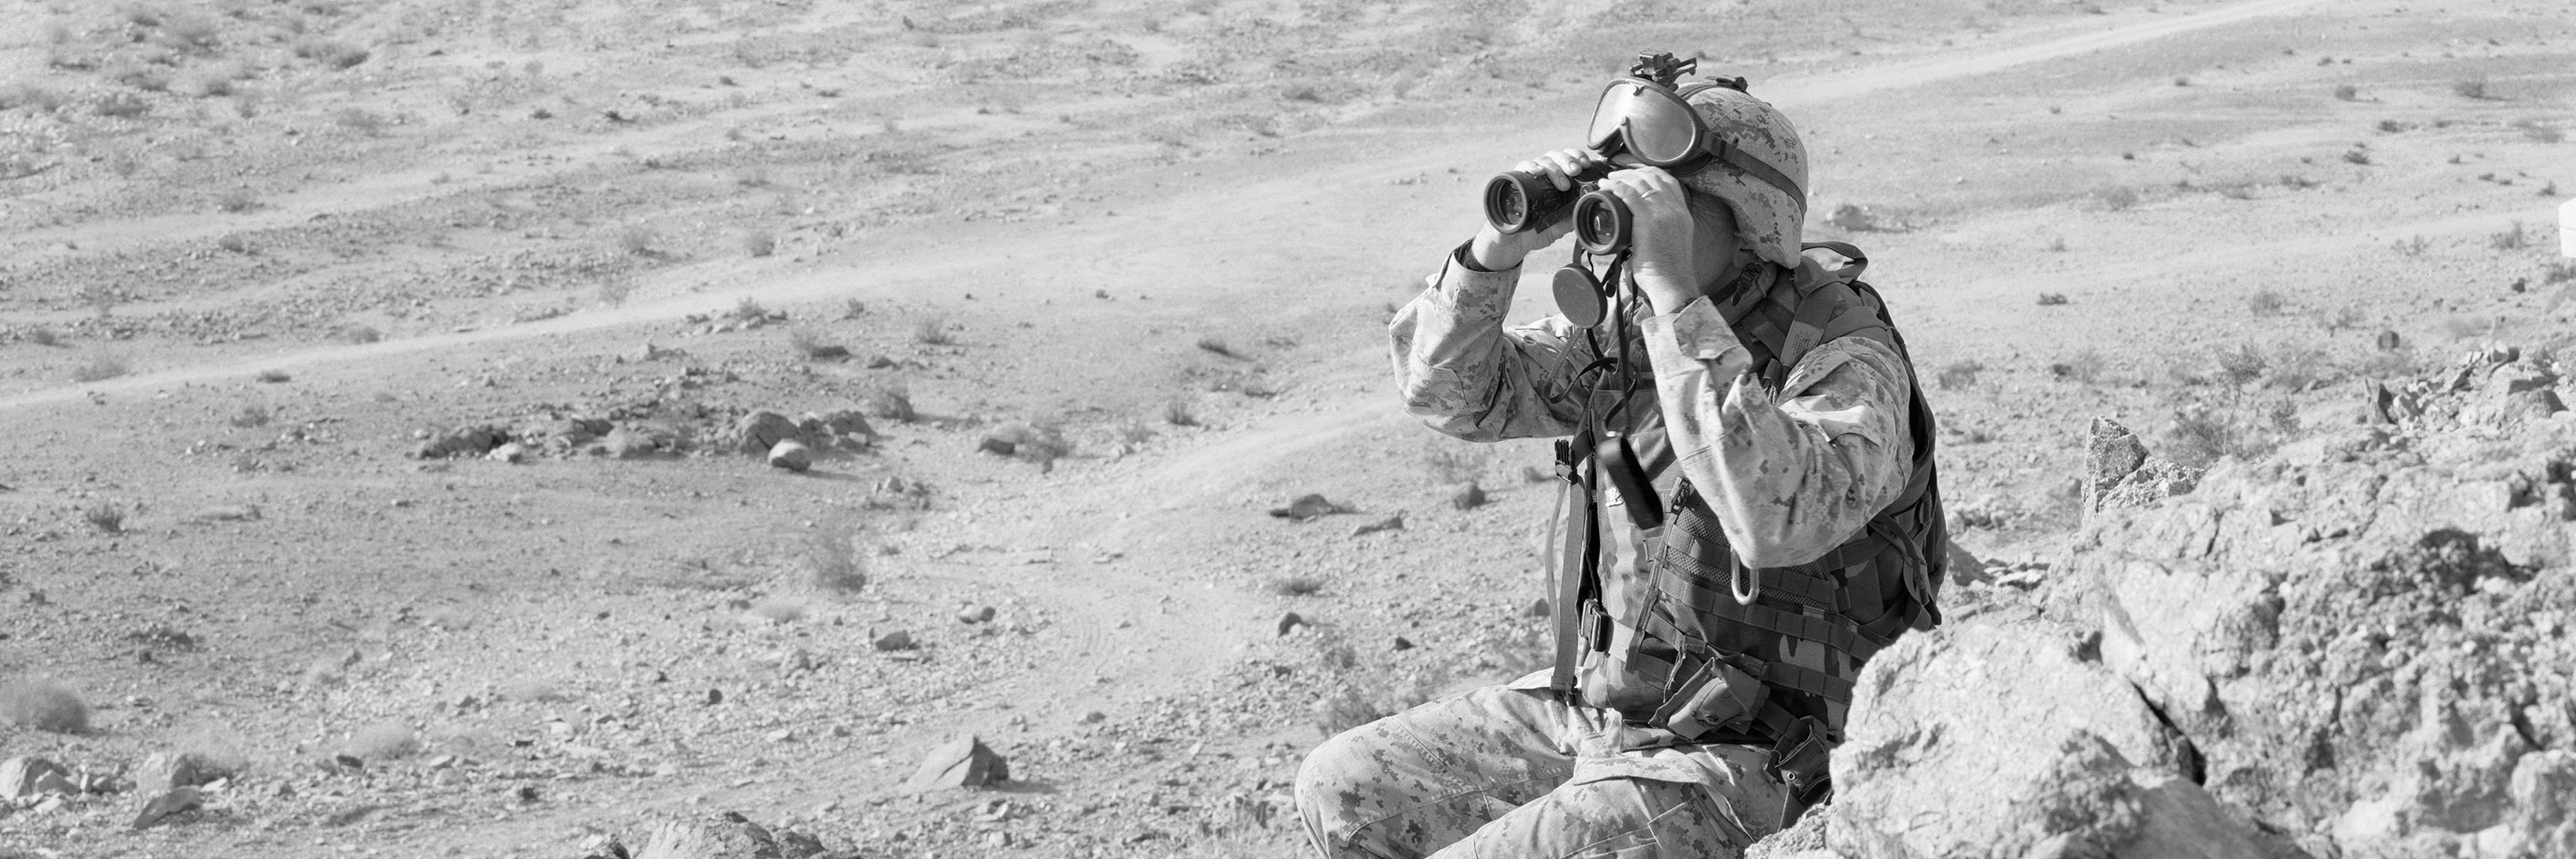 A black and white image of a men in tactical military gear holding binoculars, sitting in a desert landscape with dust and rocks